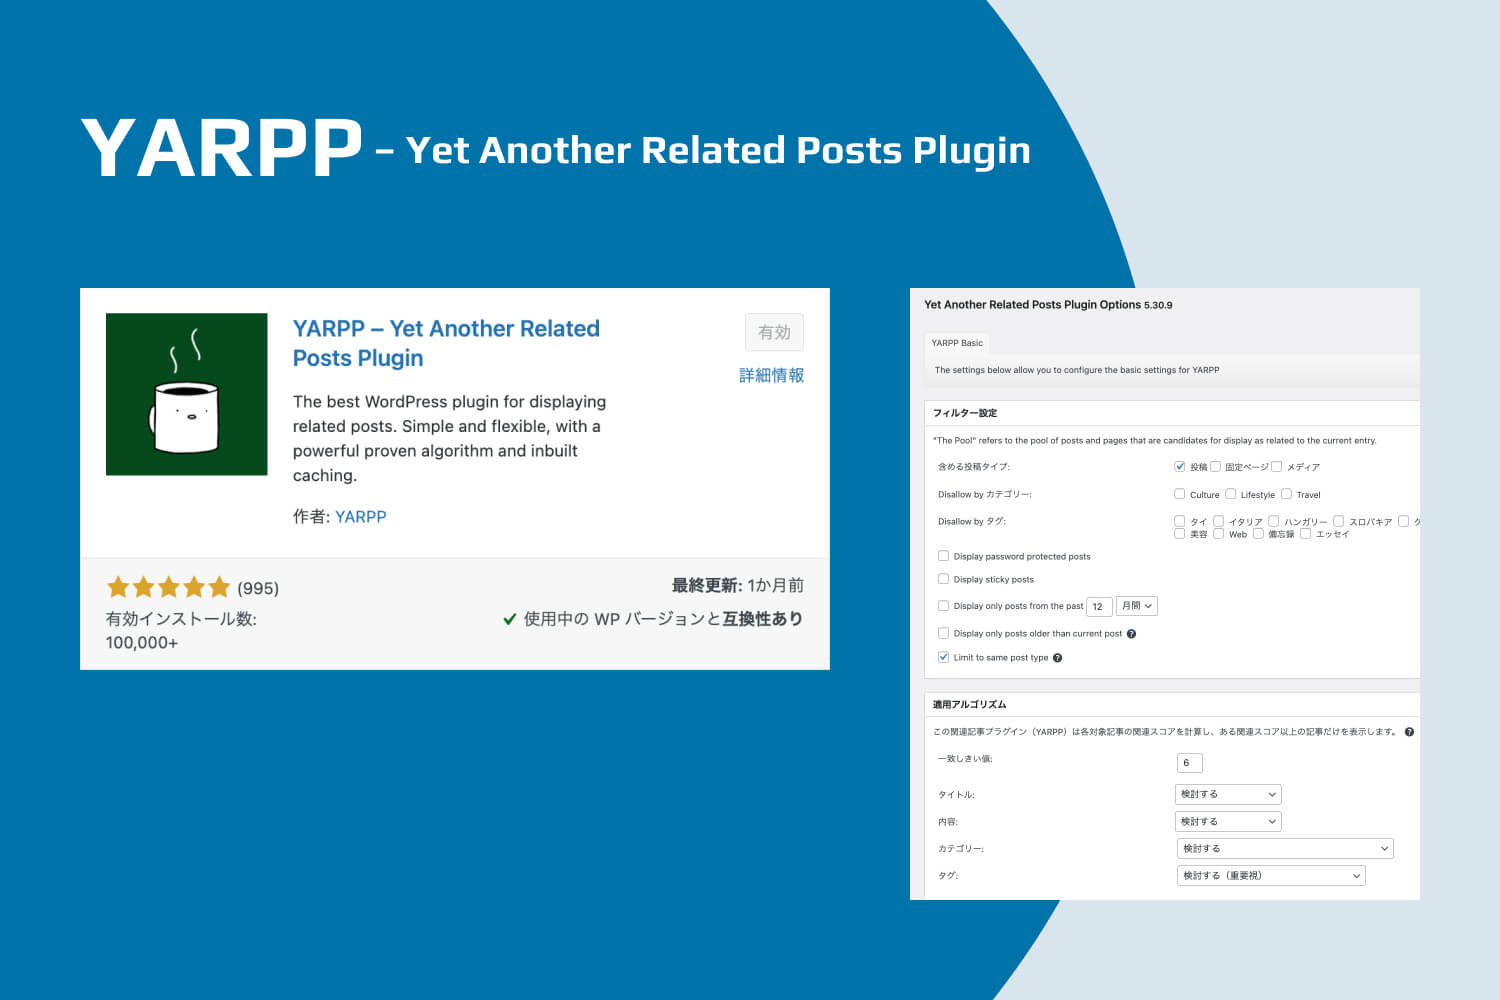 YARPP – Yet Another Related Posts Plugin